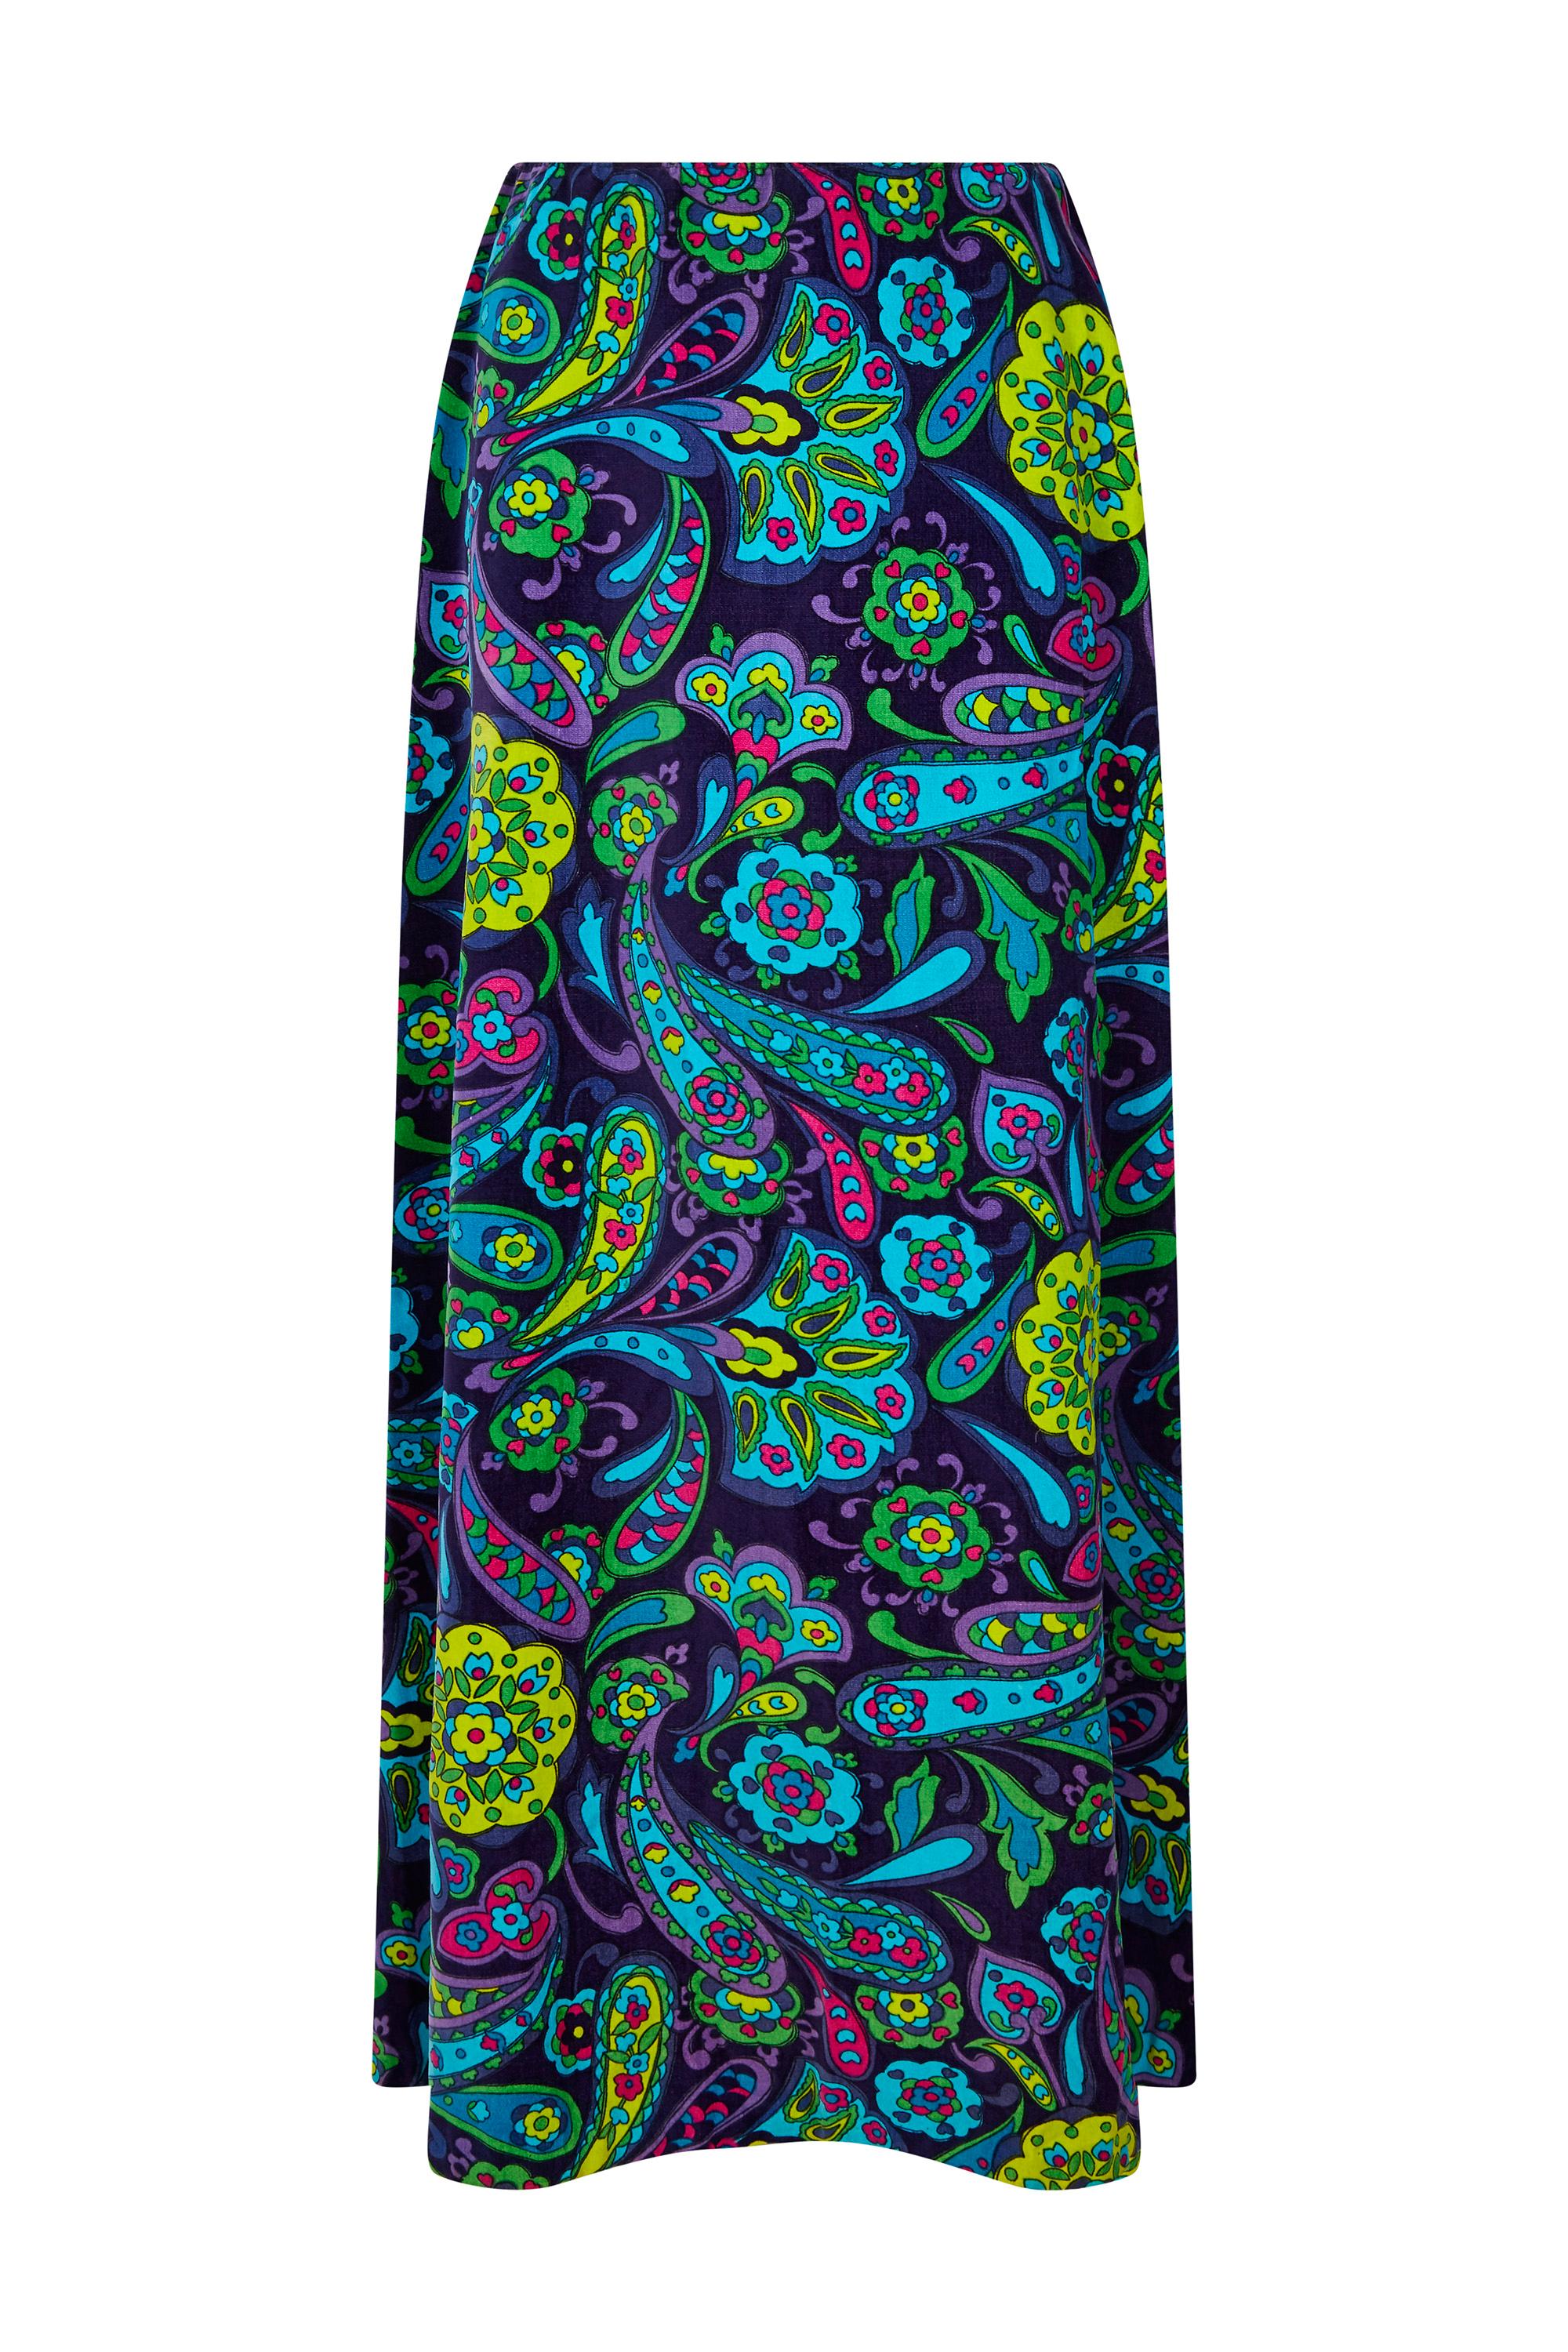 1960s Psychedelic Paisley Print Velvet Maxi Skirt and Top Ensemble For Sale 2